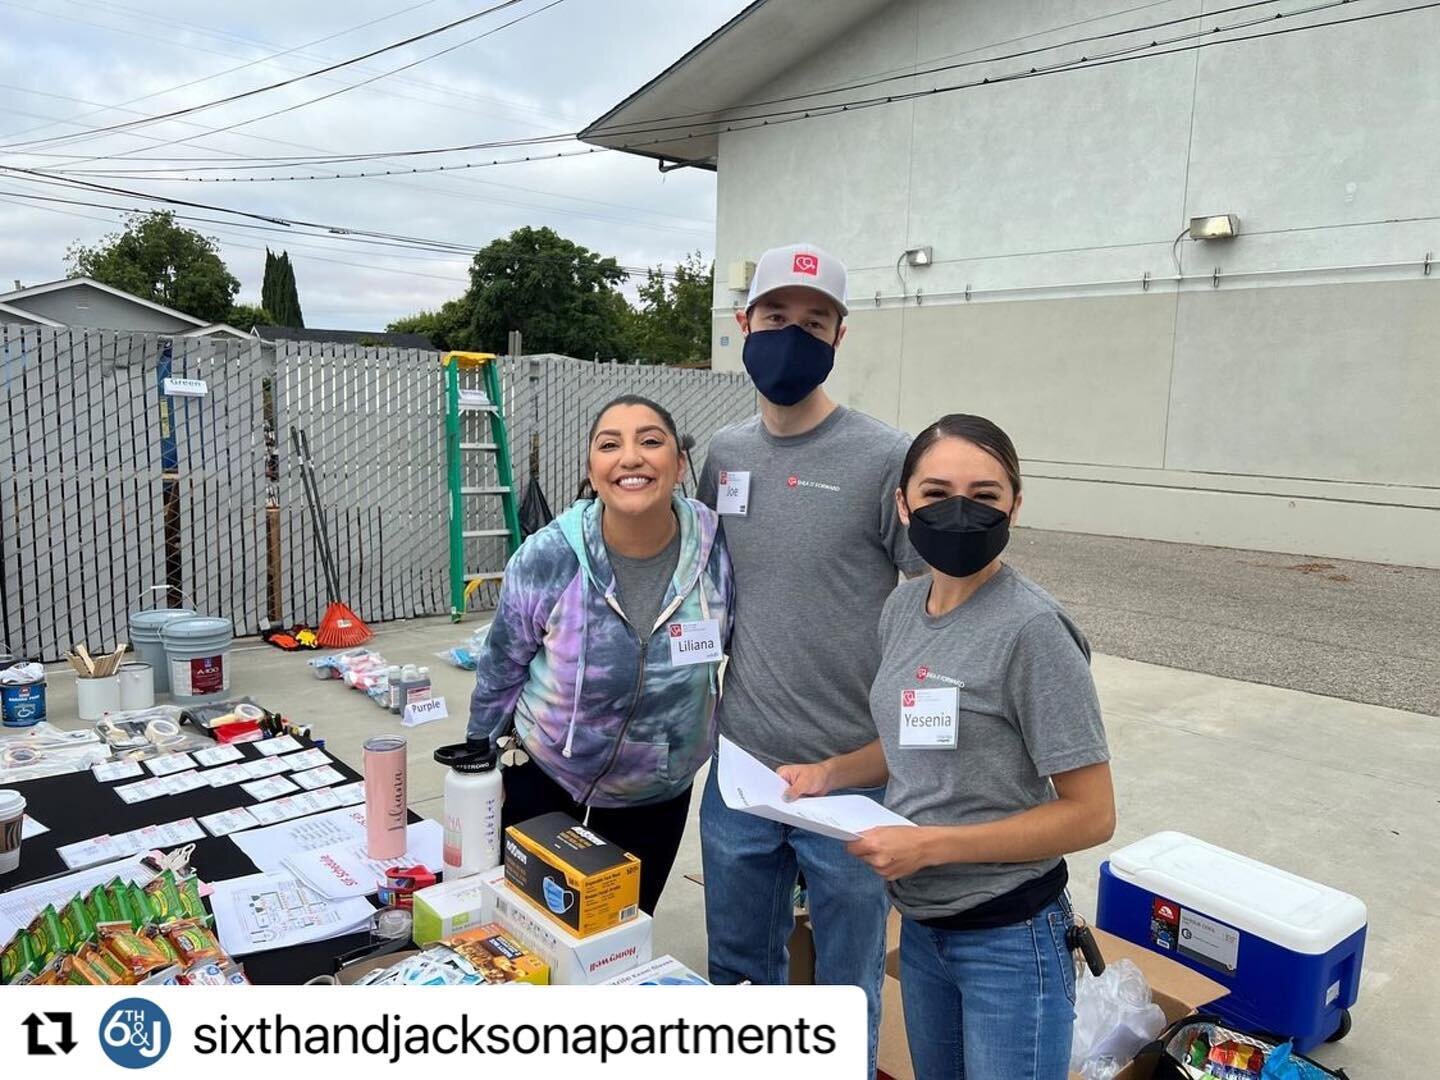 Look for the Sixth and Jackson team at Japantown events! We appreciate their efforts to be part of our growing community! 🥰 #Repost @sixthandjacksonapartments 
・・・
One of the reasons why we love working for our parent company, Shea Apartments, is be